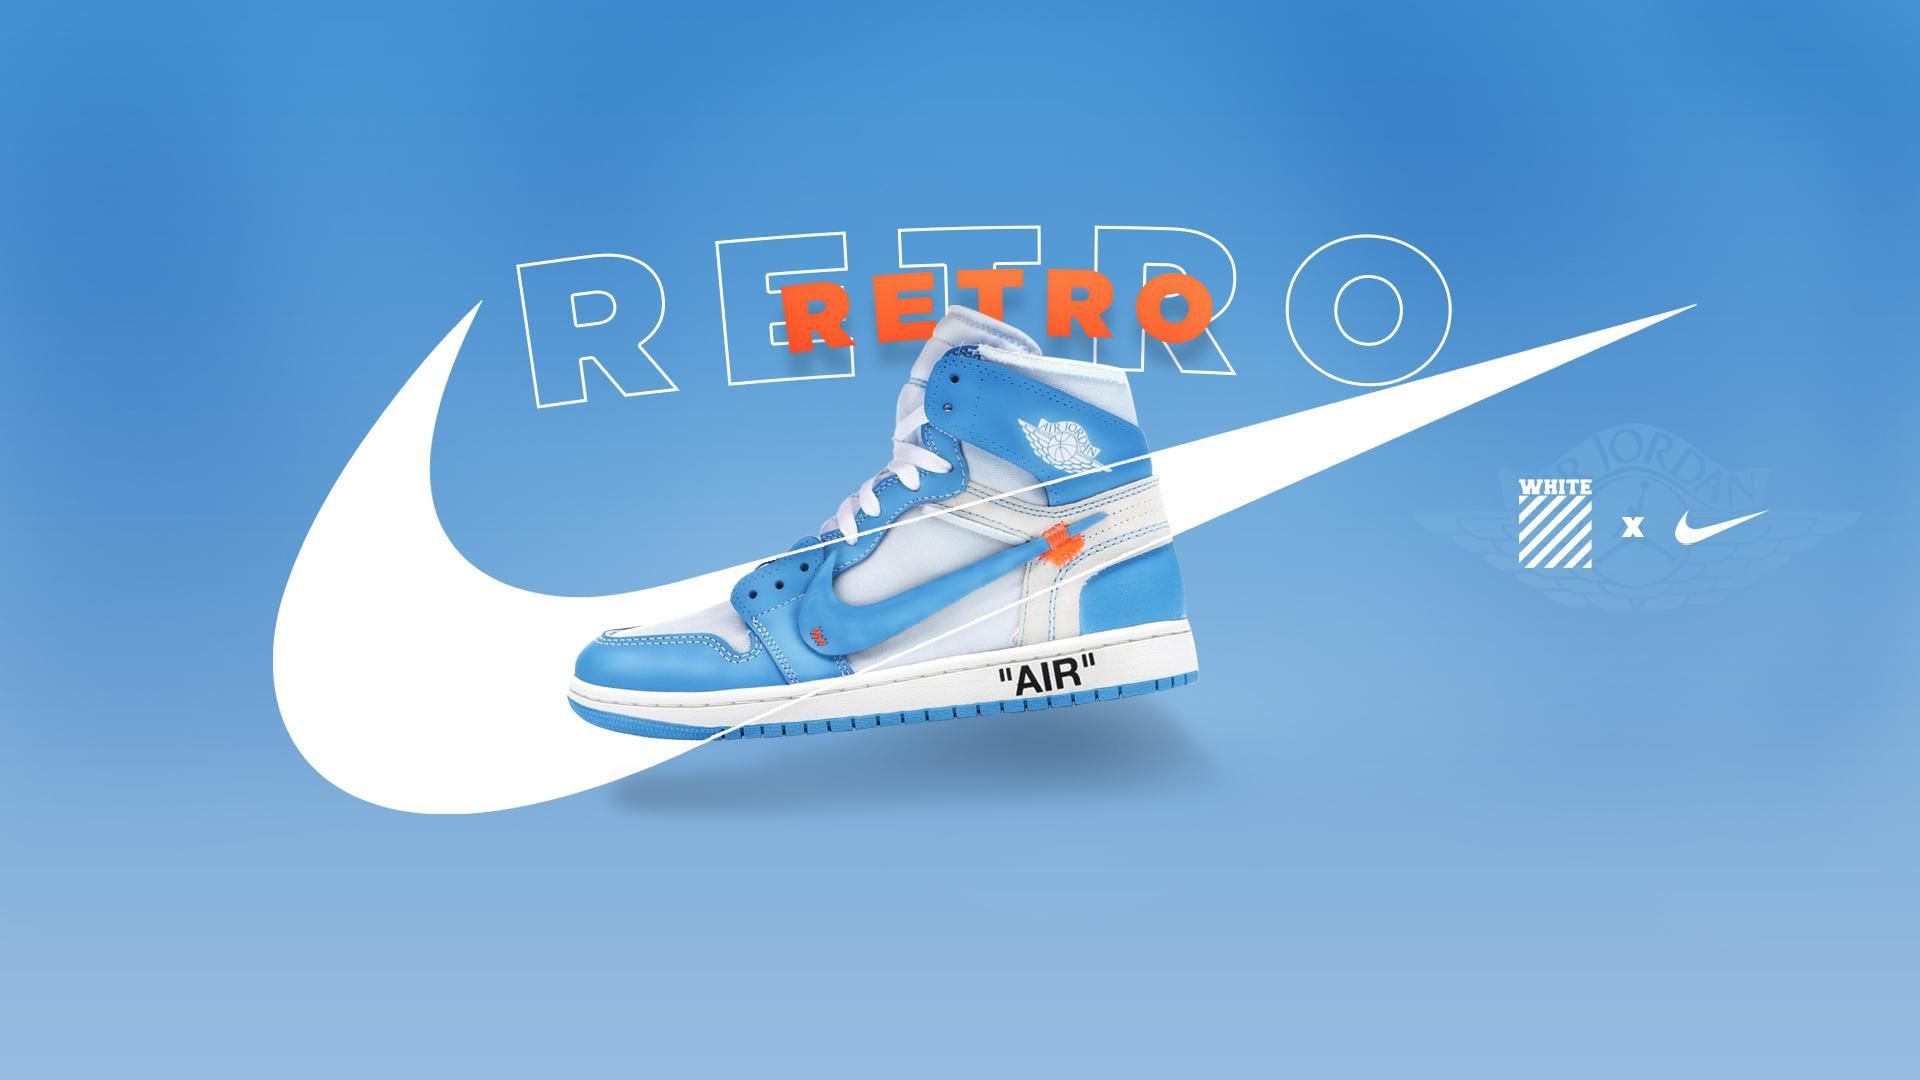 Air Jordan 1 Retro High OG 'UNC' Advertisement I made that can also be used as a cl. Jordan logo wallpaper, Jordan shoes wallpaper, Sneakers wallpaper